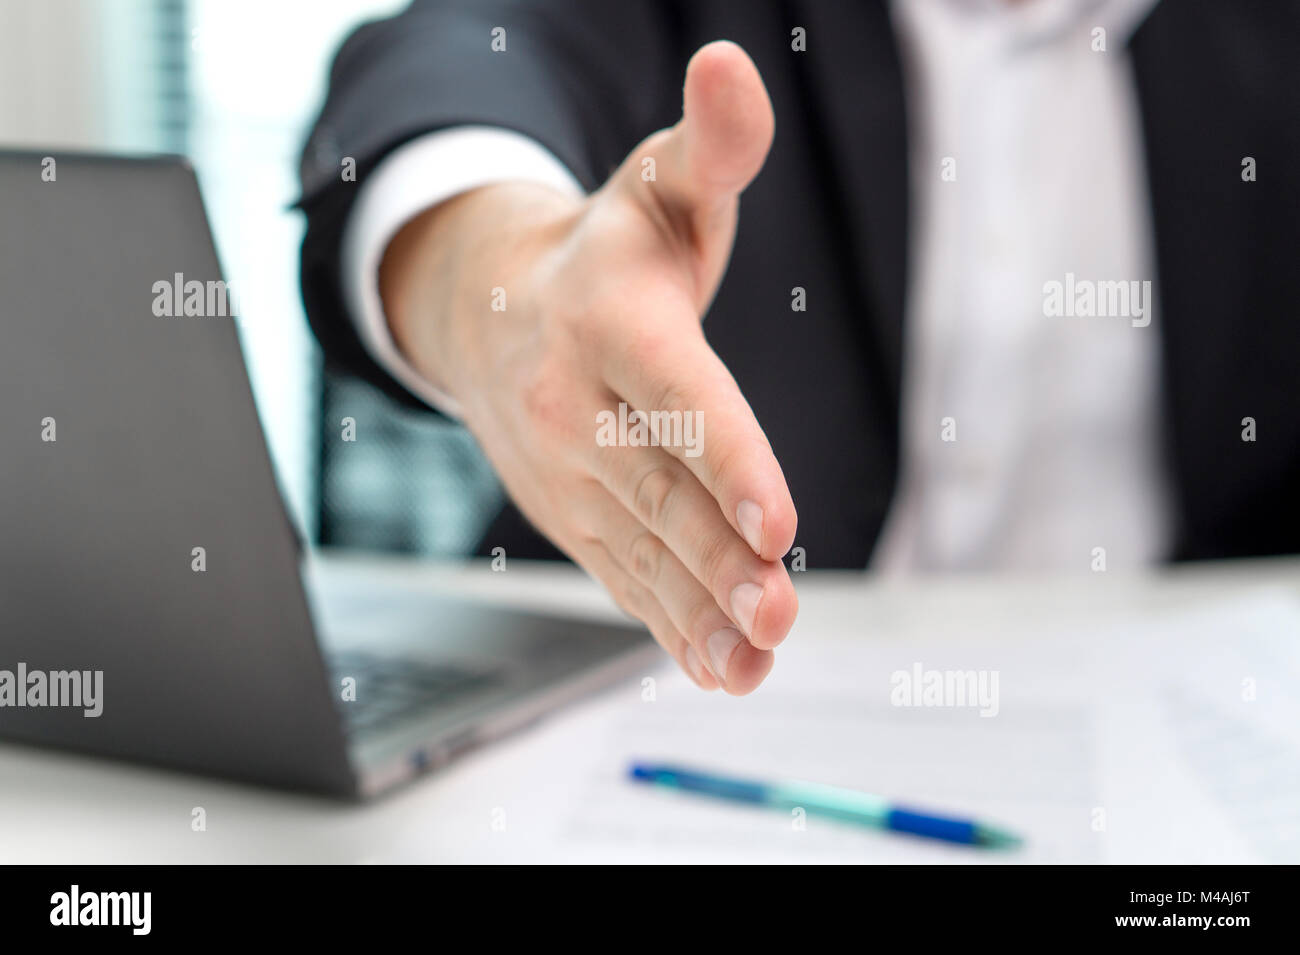 Business man offer and give hand for handshake in office. Salesman, bank worker or lawyer shake for deal, agreement, loan or sale. Partnership. Stock Photo